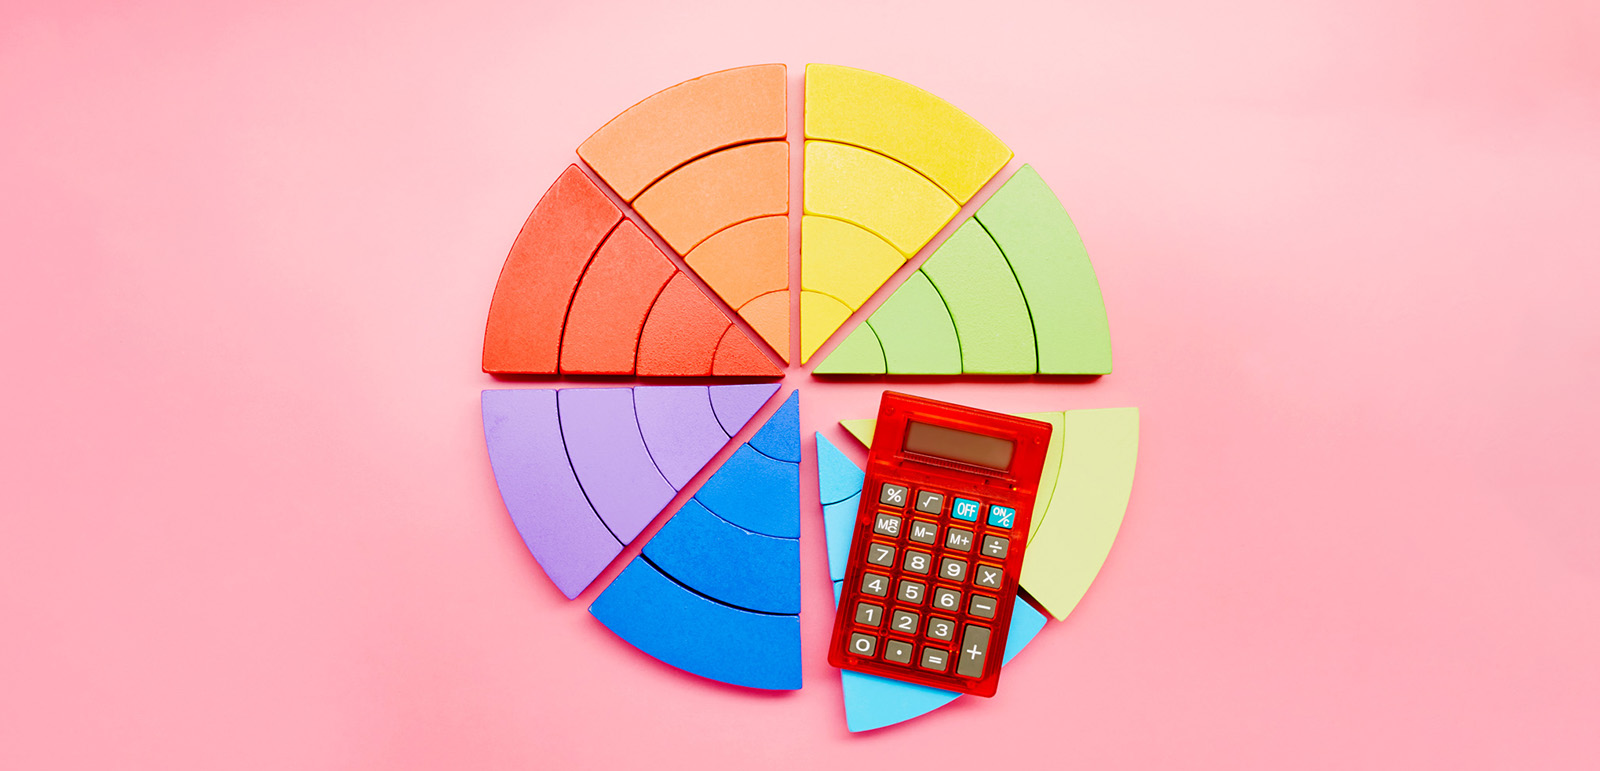 High angle view of a pie chart made of colorful building blocks and red calculator on pink background. Photo by Getty Images